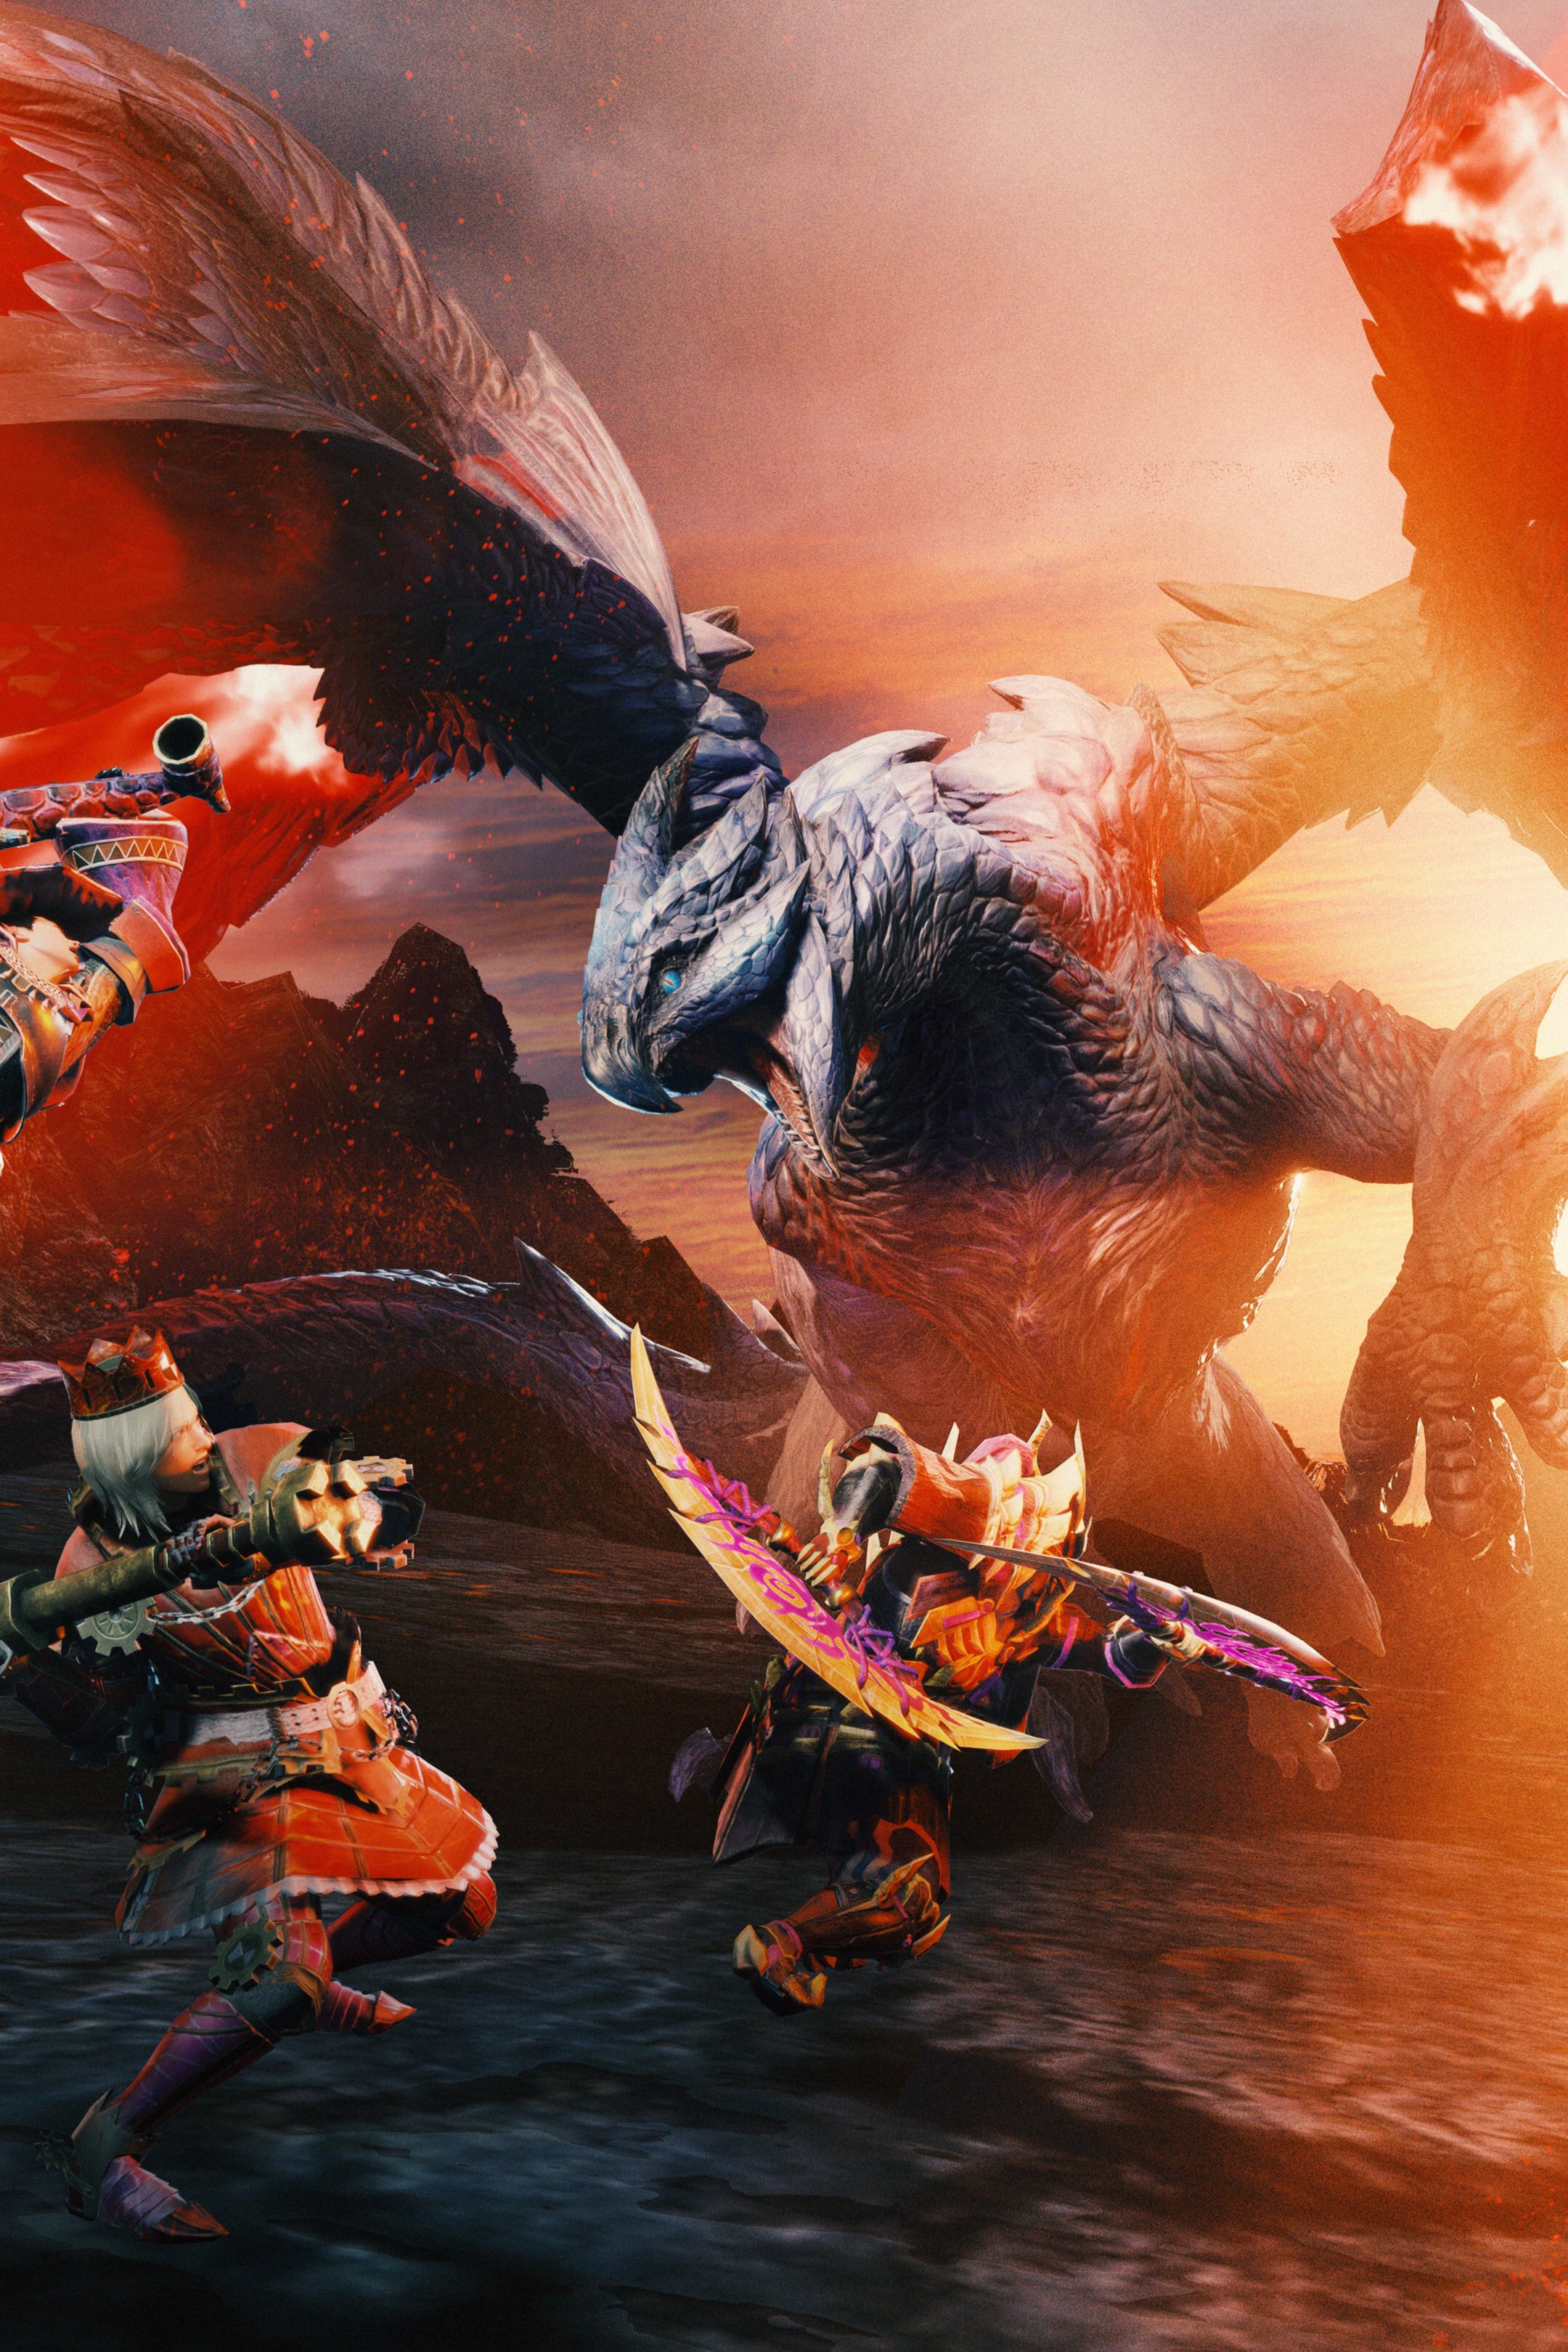 Monster Hunter this new art as a wallpaper for your device of choice. #MHRise